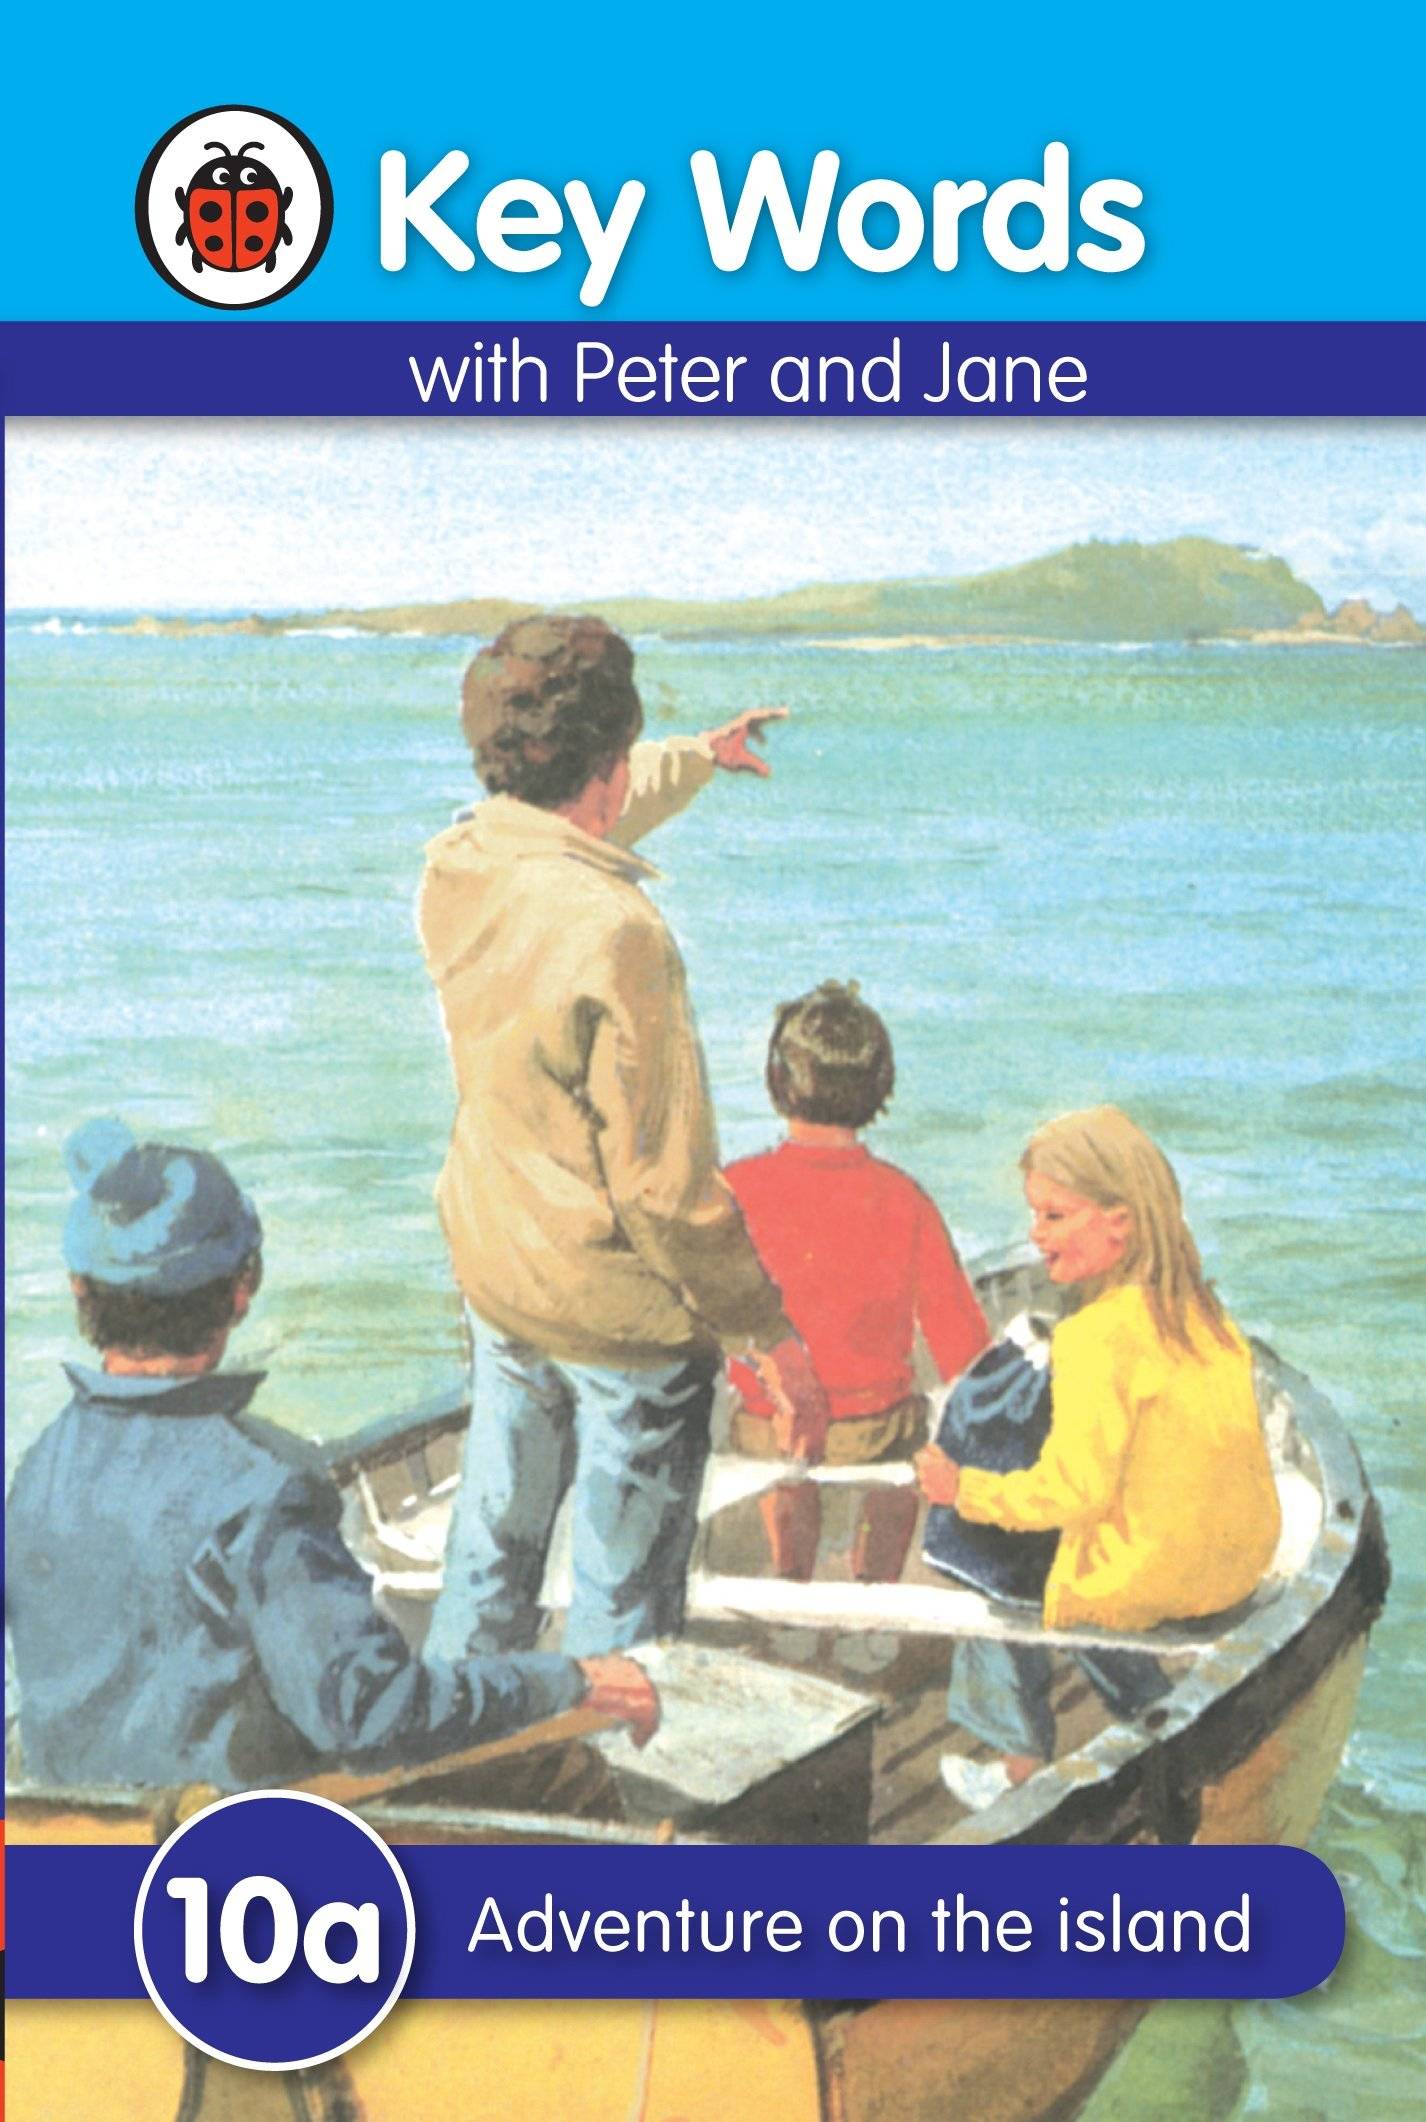 IMG : Key words with Peter and Jane- Adventure on the Island#10a